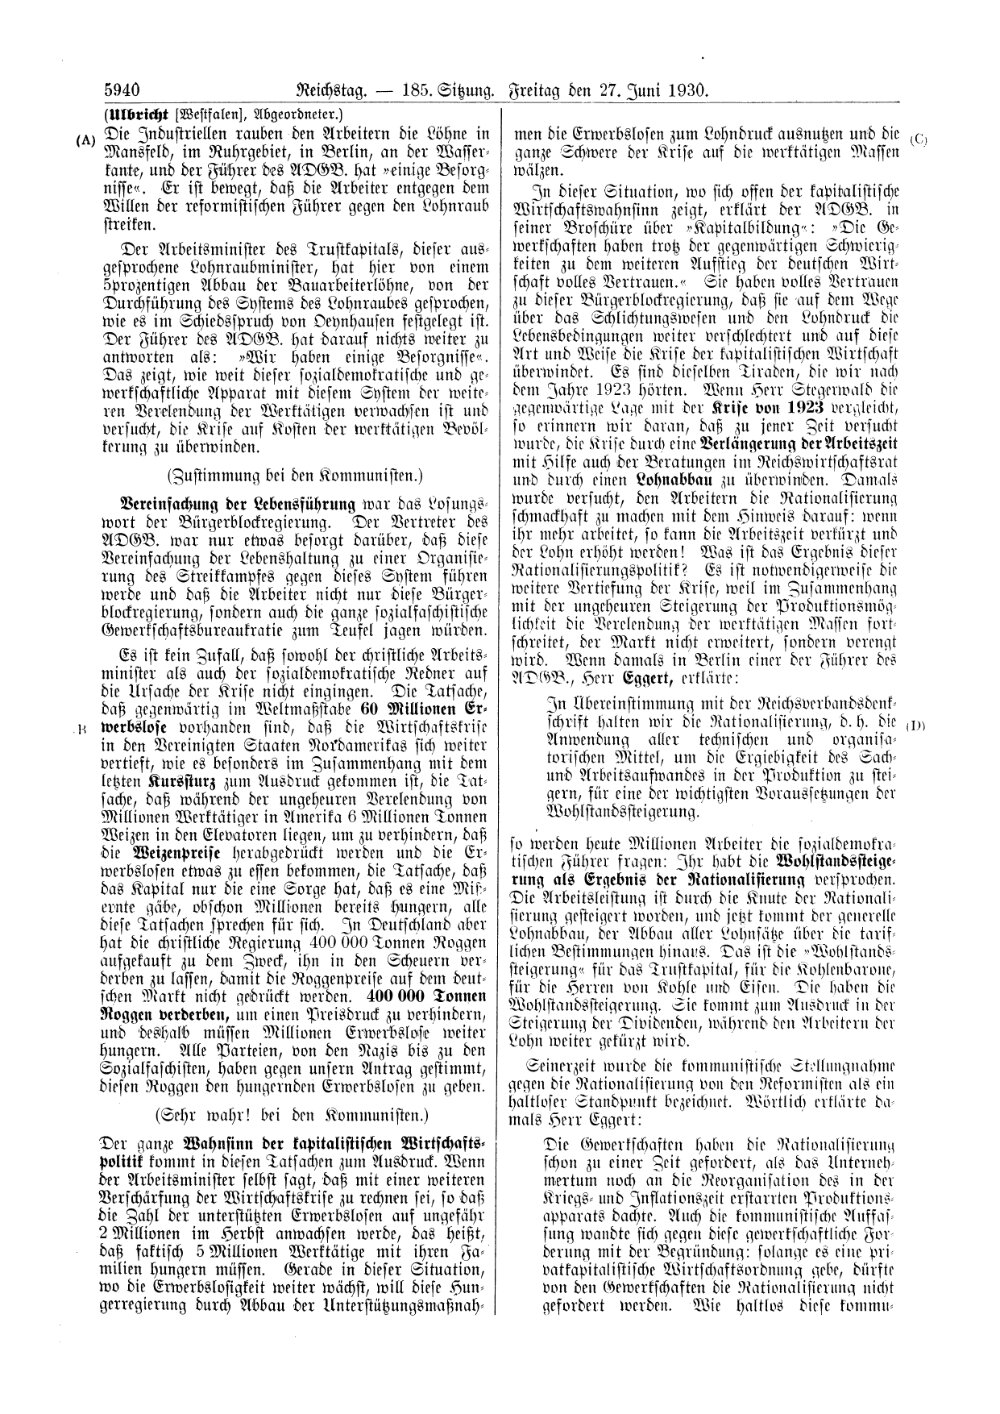 Scan of page 5940